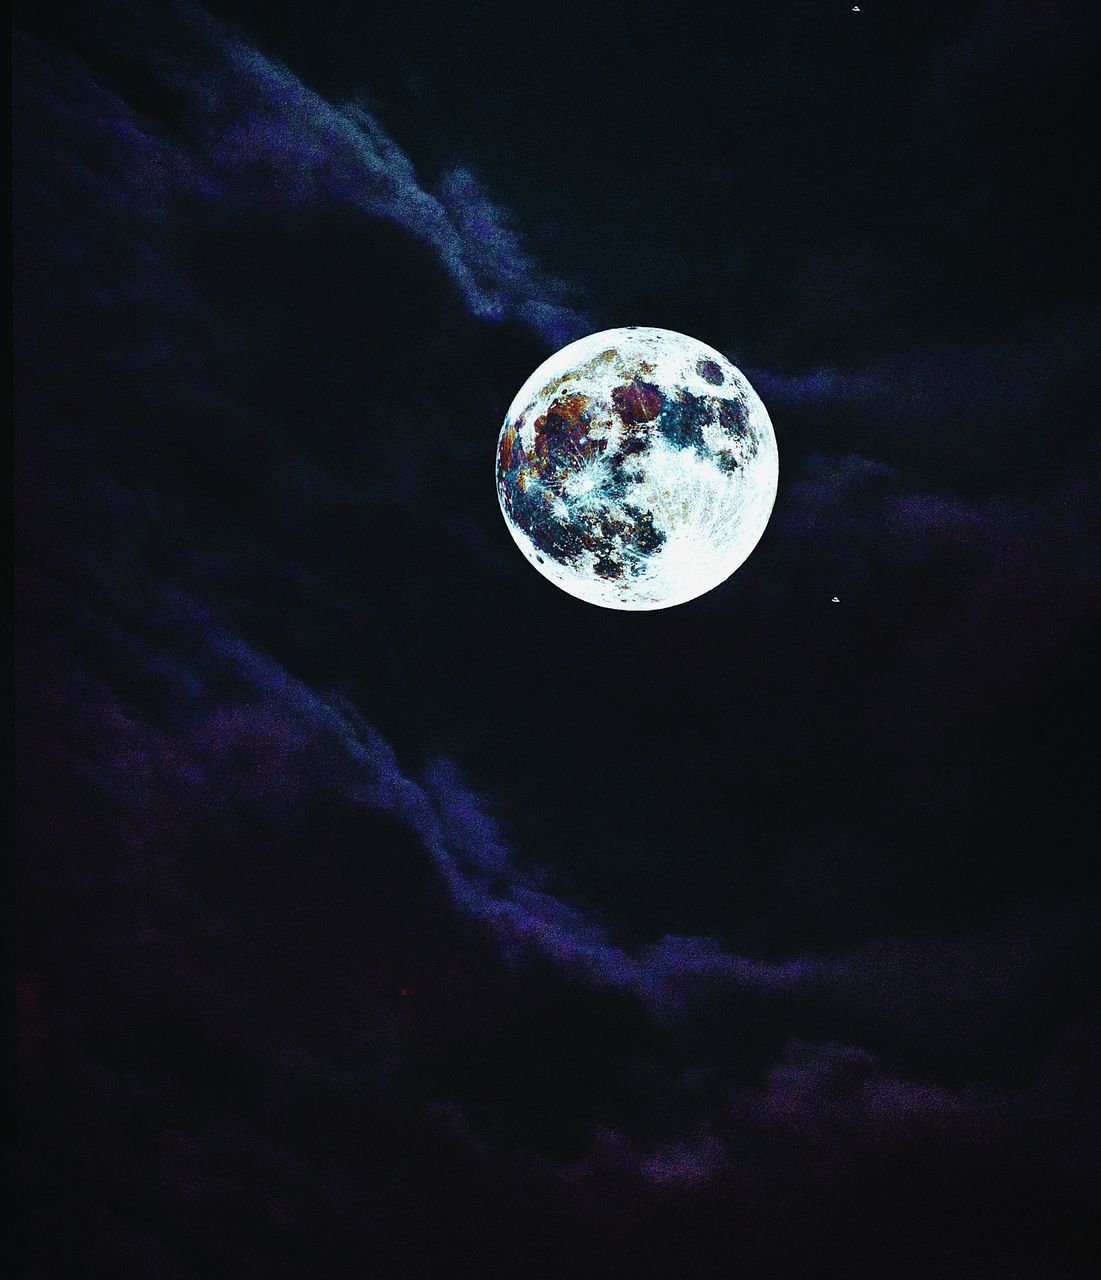 space, astronomical object, sky, outer space, moon, sphere, night, earth, astronomy, cloud, planet, darkness, no people, circle, full moon, nature, planet earth, shape, low angle view, star, dark, screenshot, moonlight, outdoors, geometric shape, blue, beauty in nature